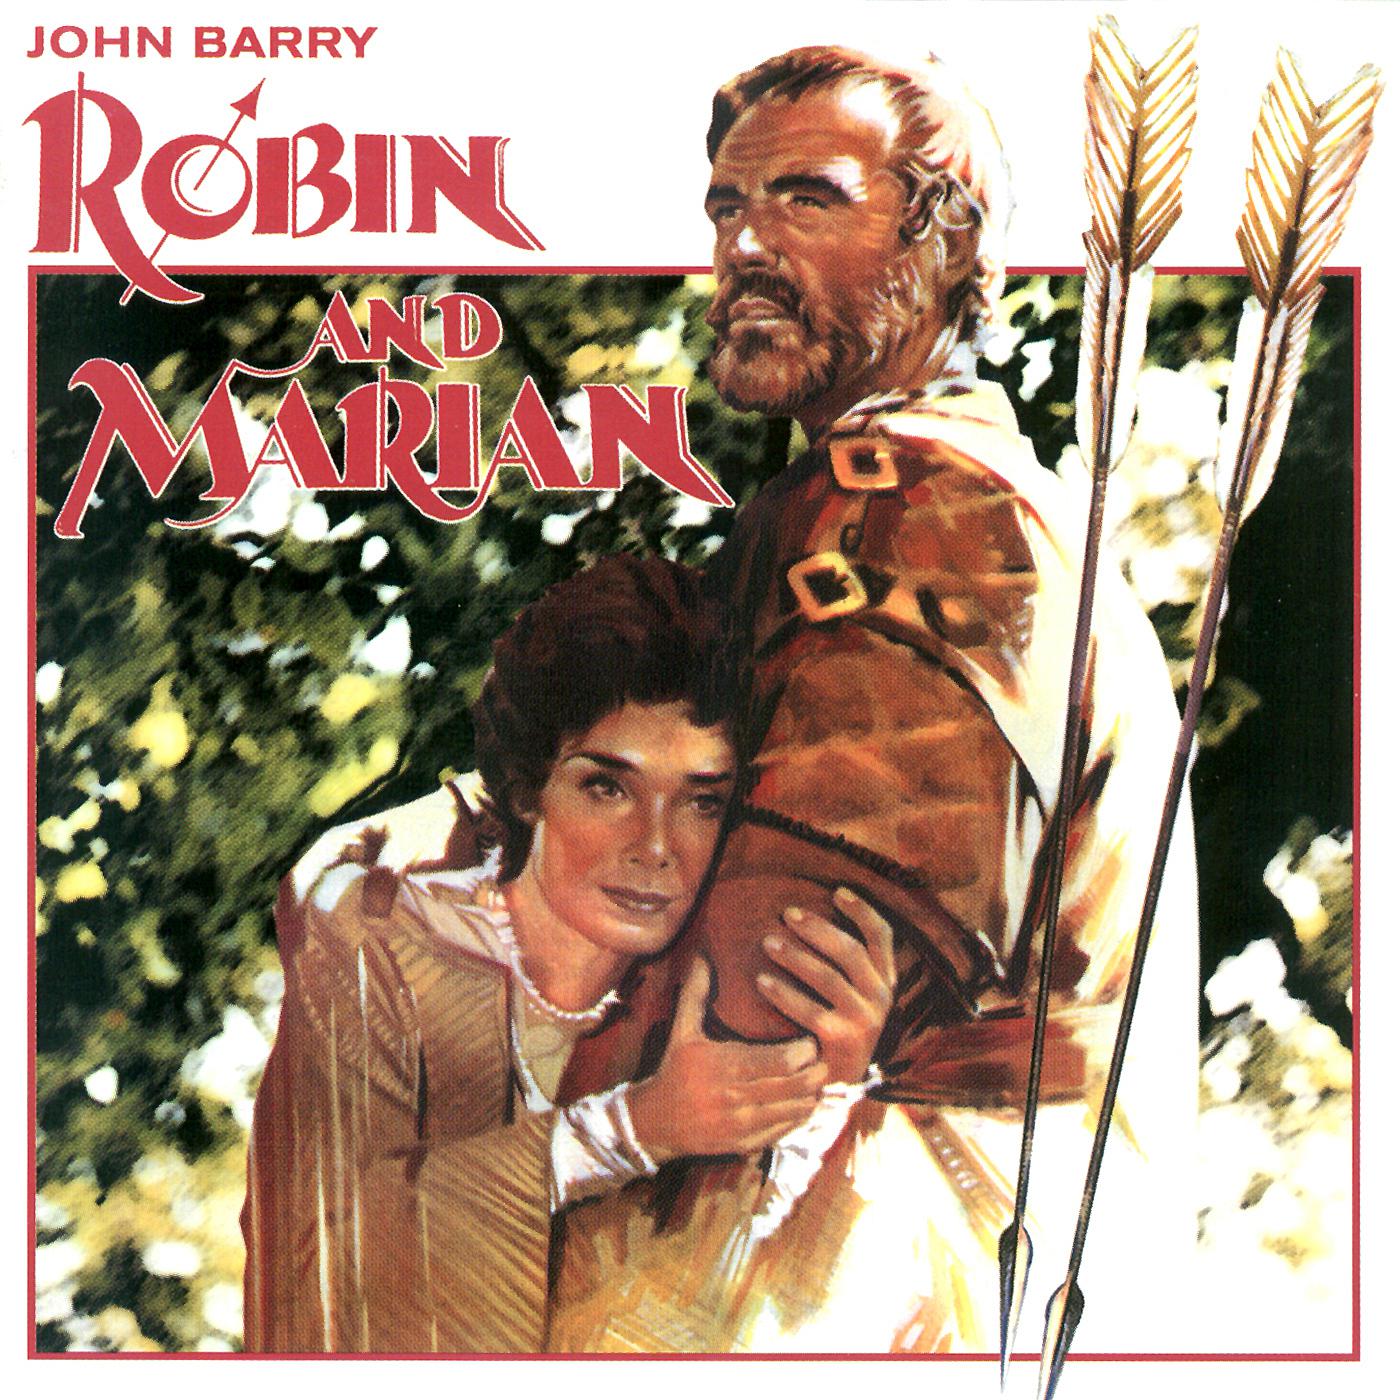 First Love Theme (From "Robin and Marian")